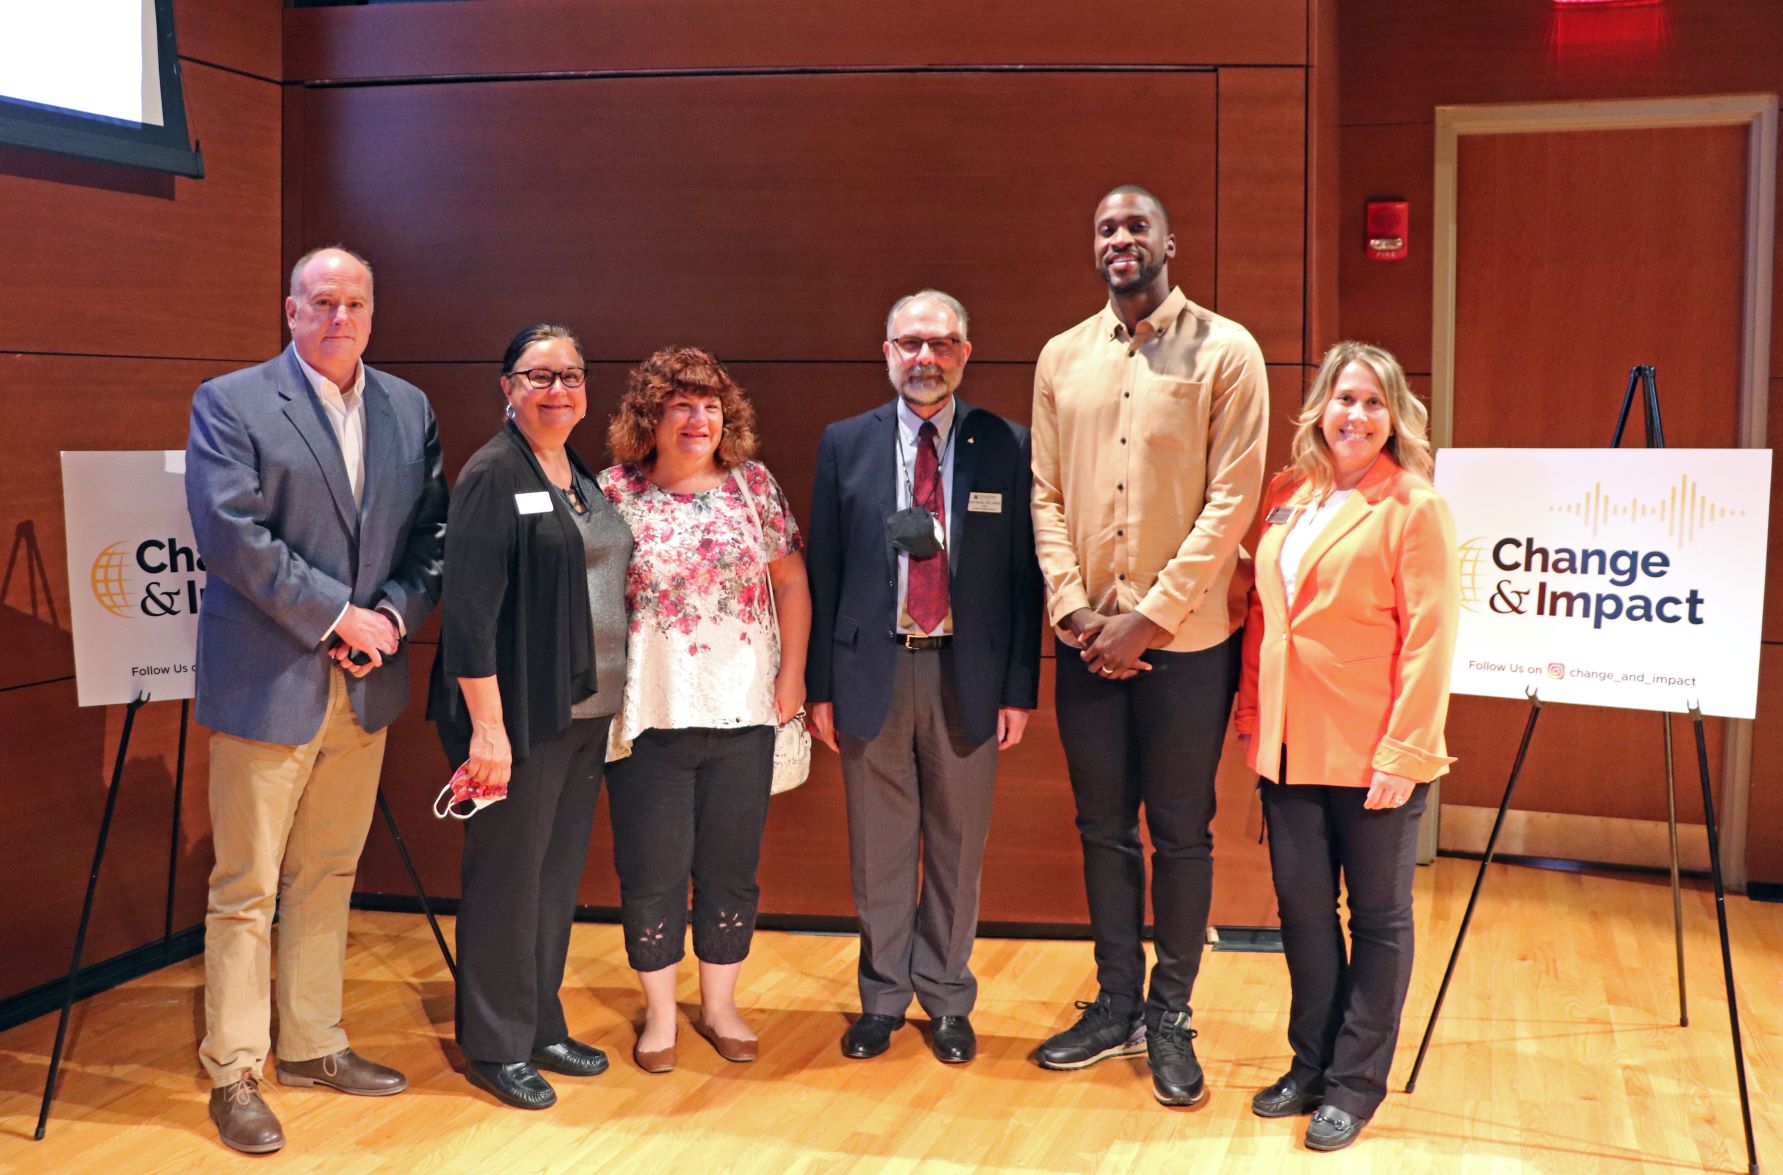 Michael Kidd-Gilchrist and Joe Donaher pose with staff and faculty from Stockton University, in addition to Maria Turner from the Atlantic County chapter of the National Stuttering Association.